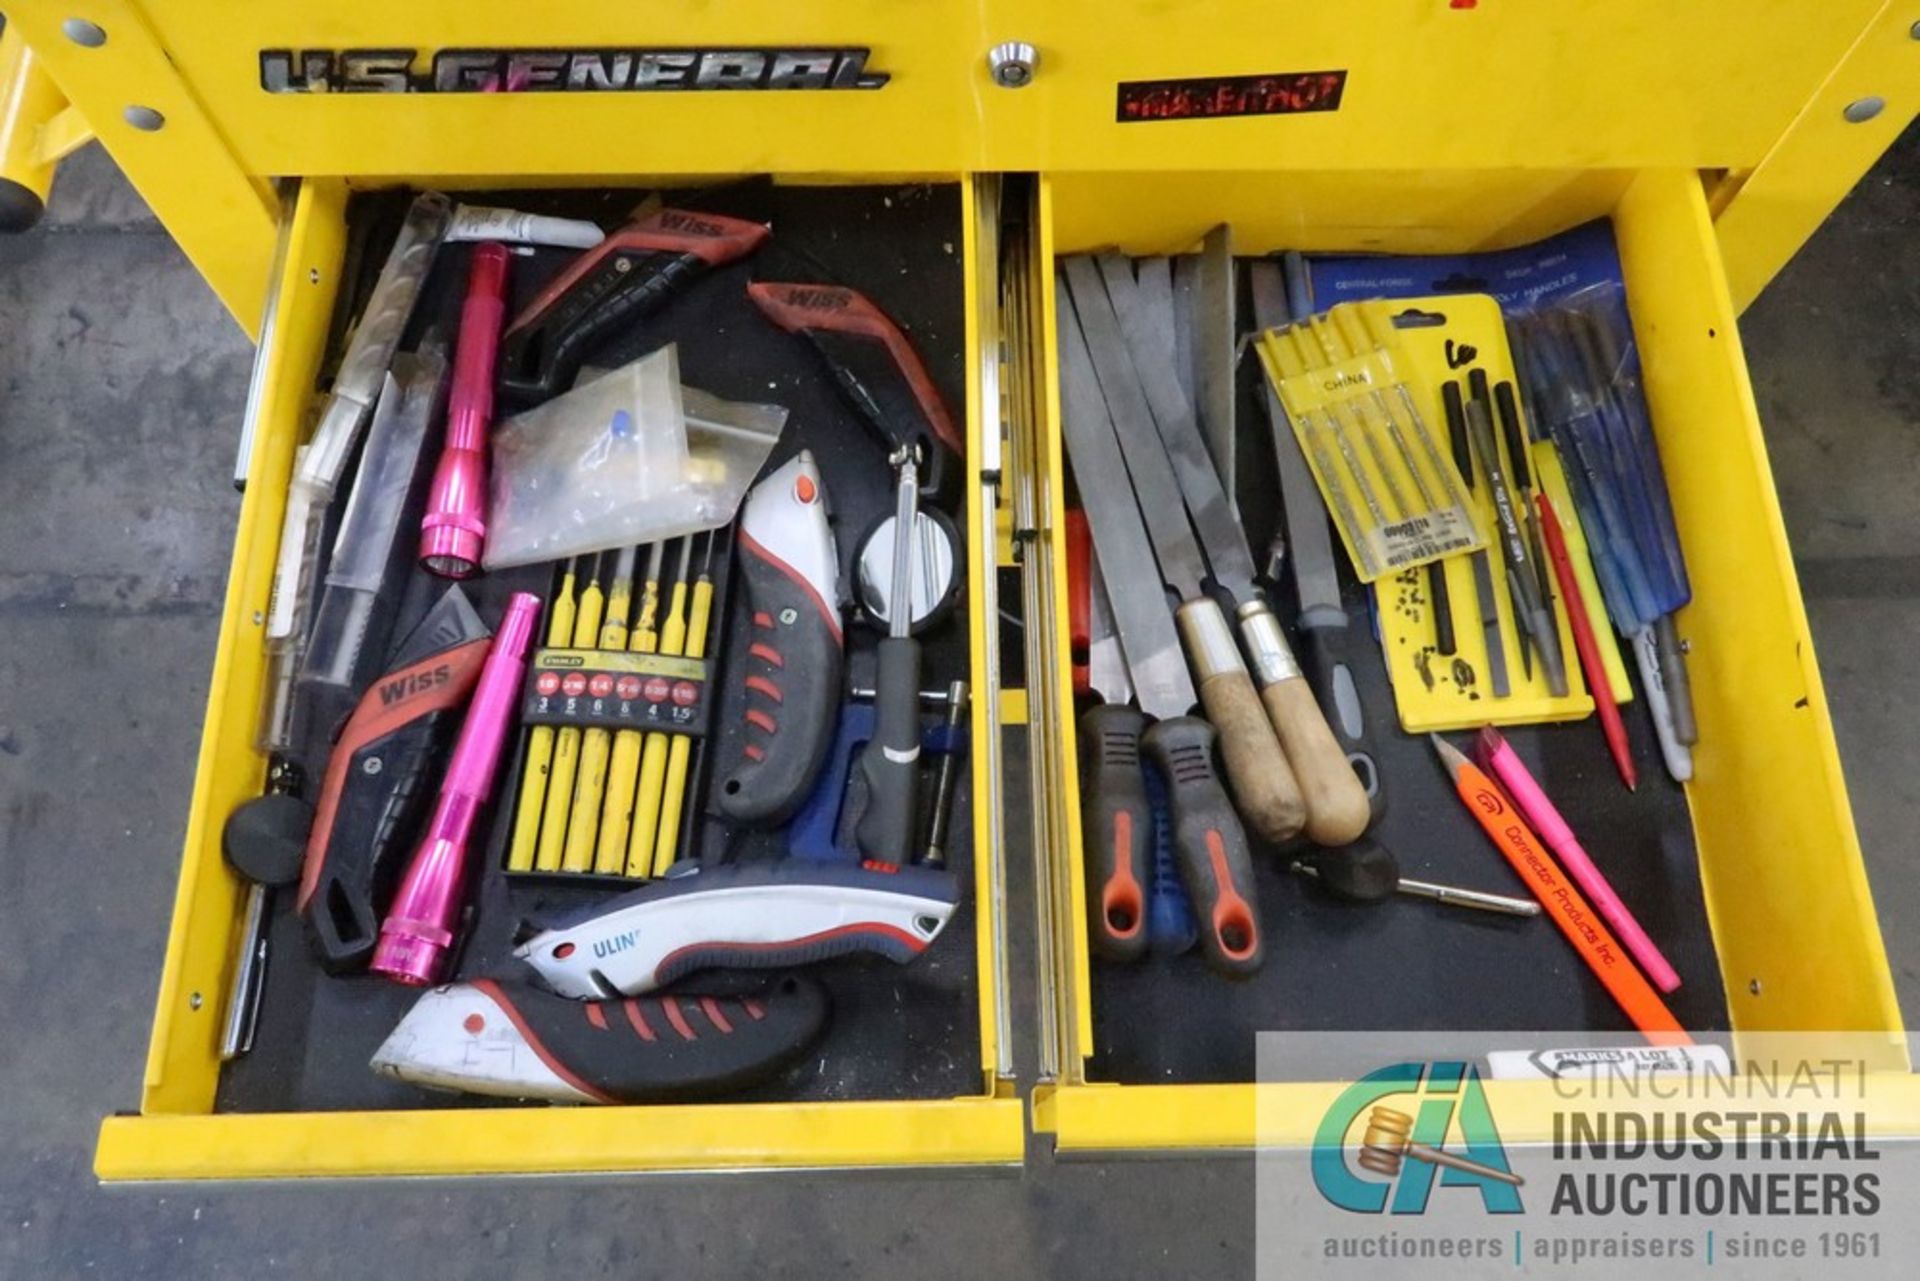 5-DRAWER US GENERAL PORTABLE TOOLBOX WITH MISCELLANEOUS TOOLS - Image 3 of 6